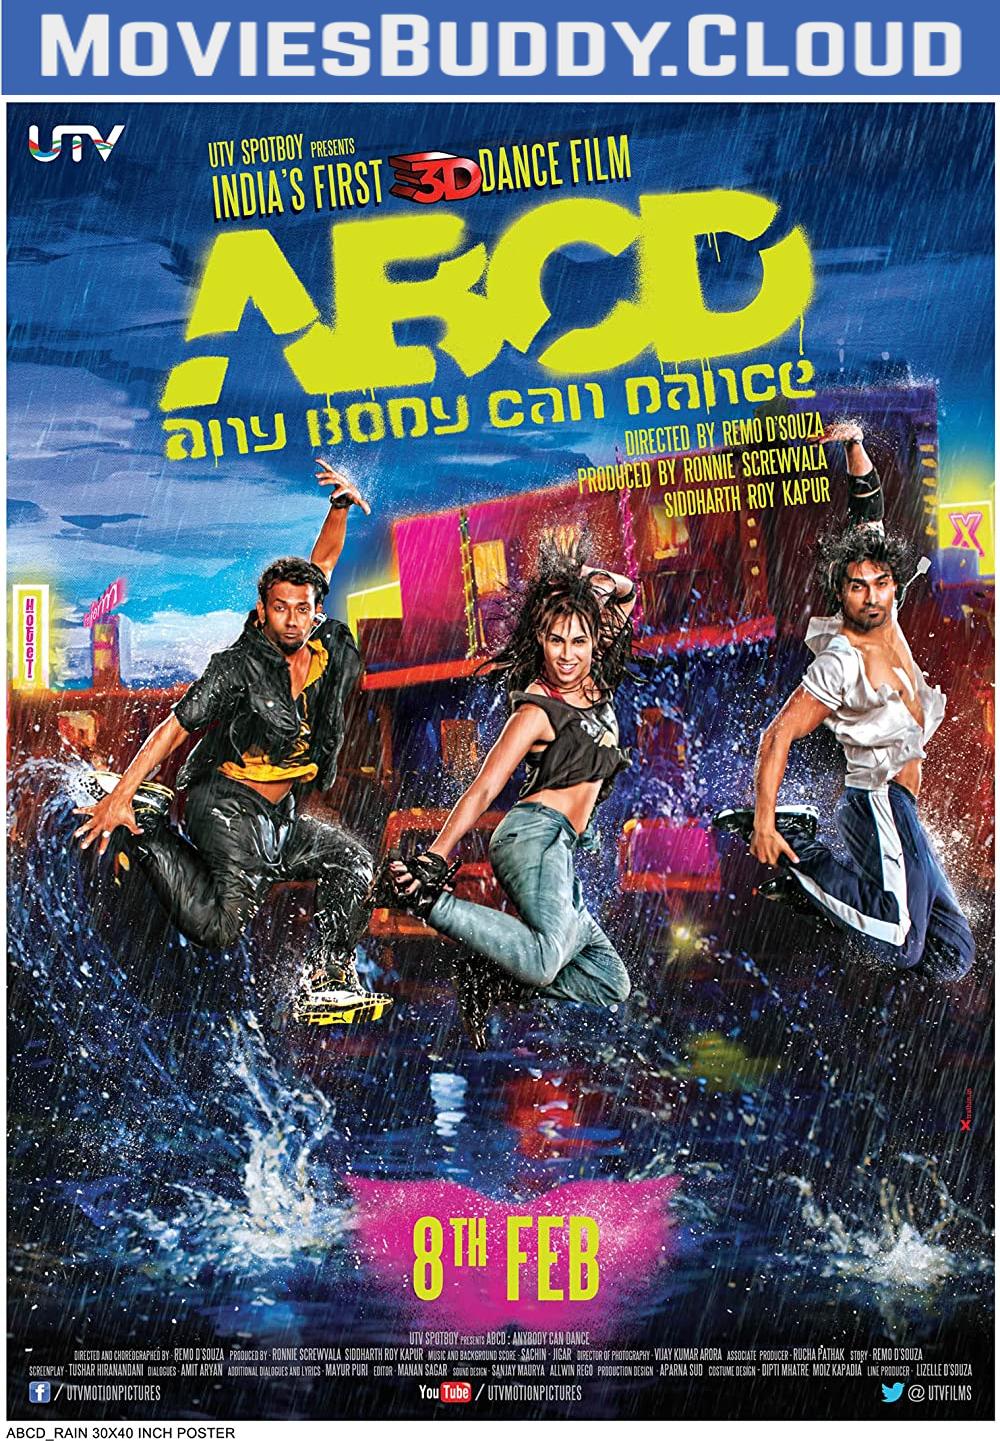 Free Download ABCD (Any Body Can Dance) Full Movie